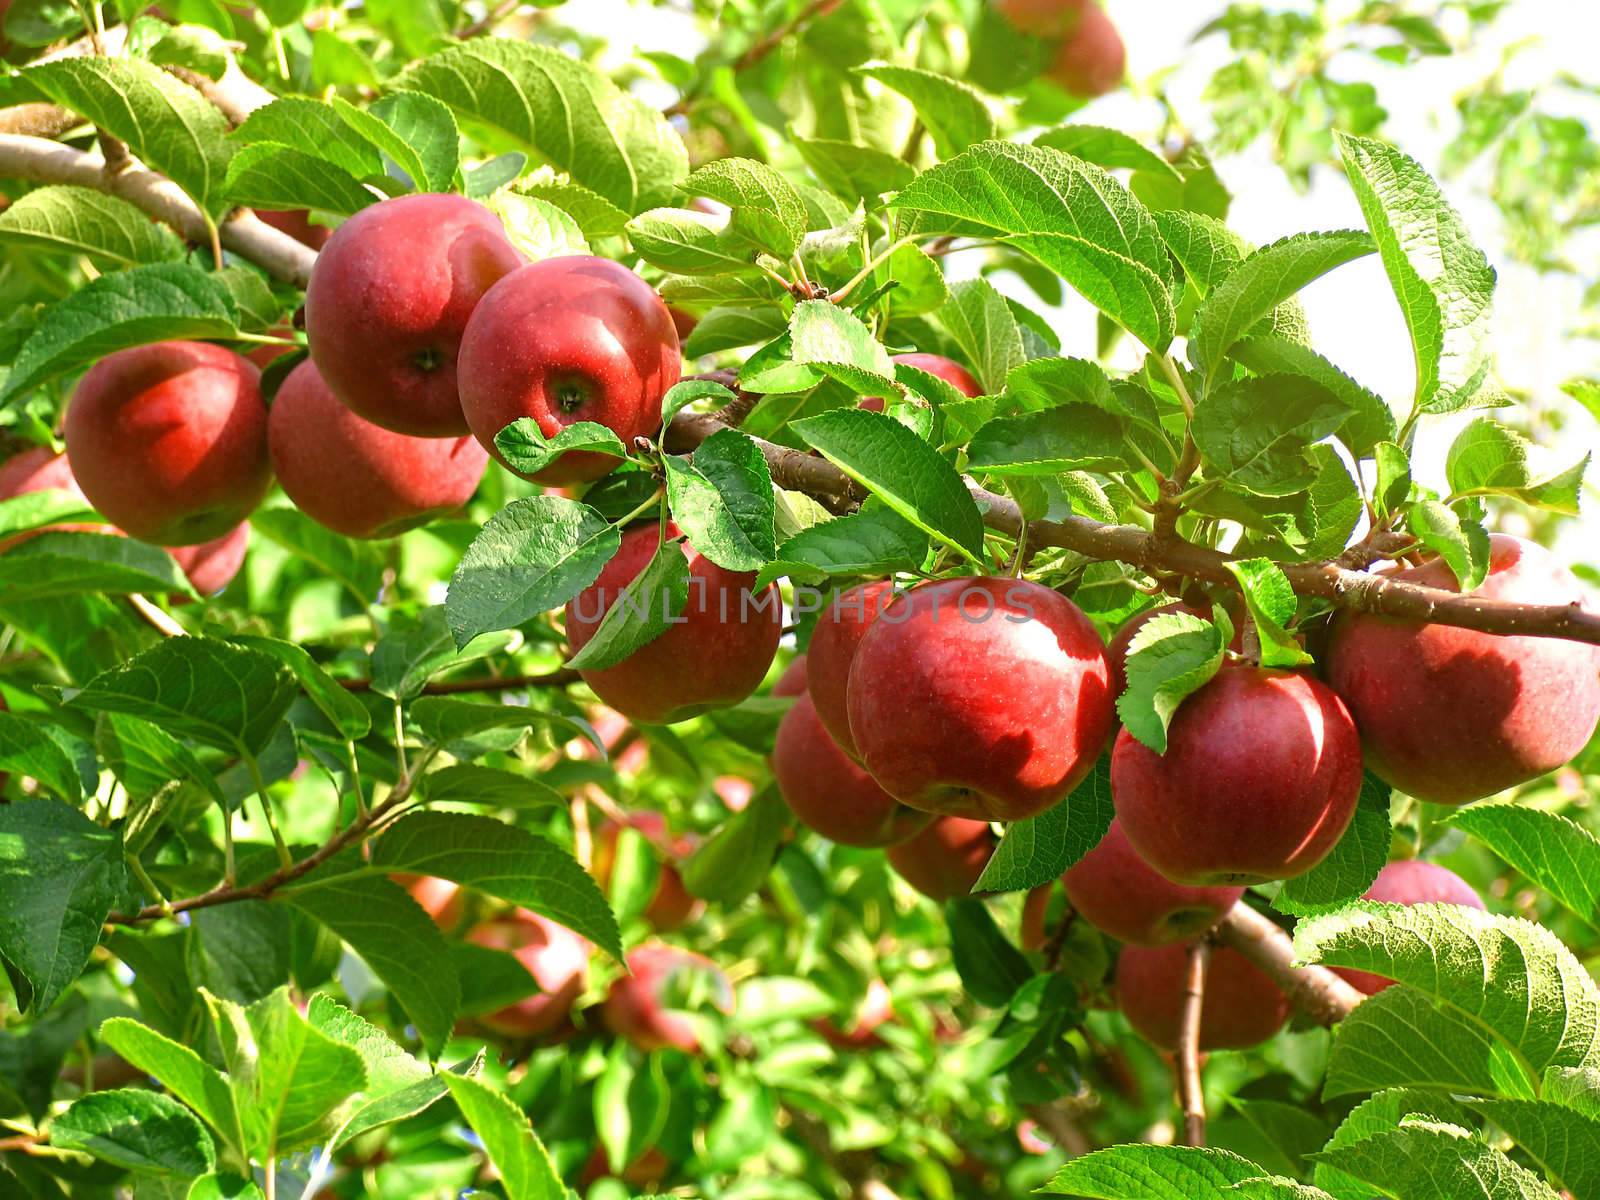 Red Macintosh apples in the orchard